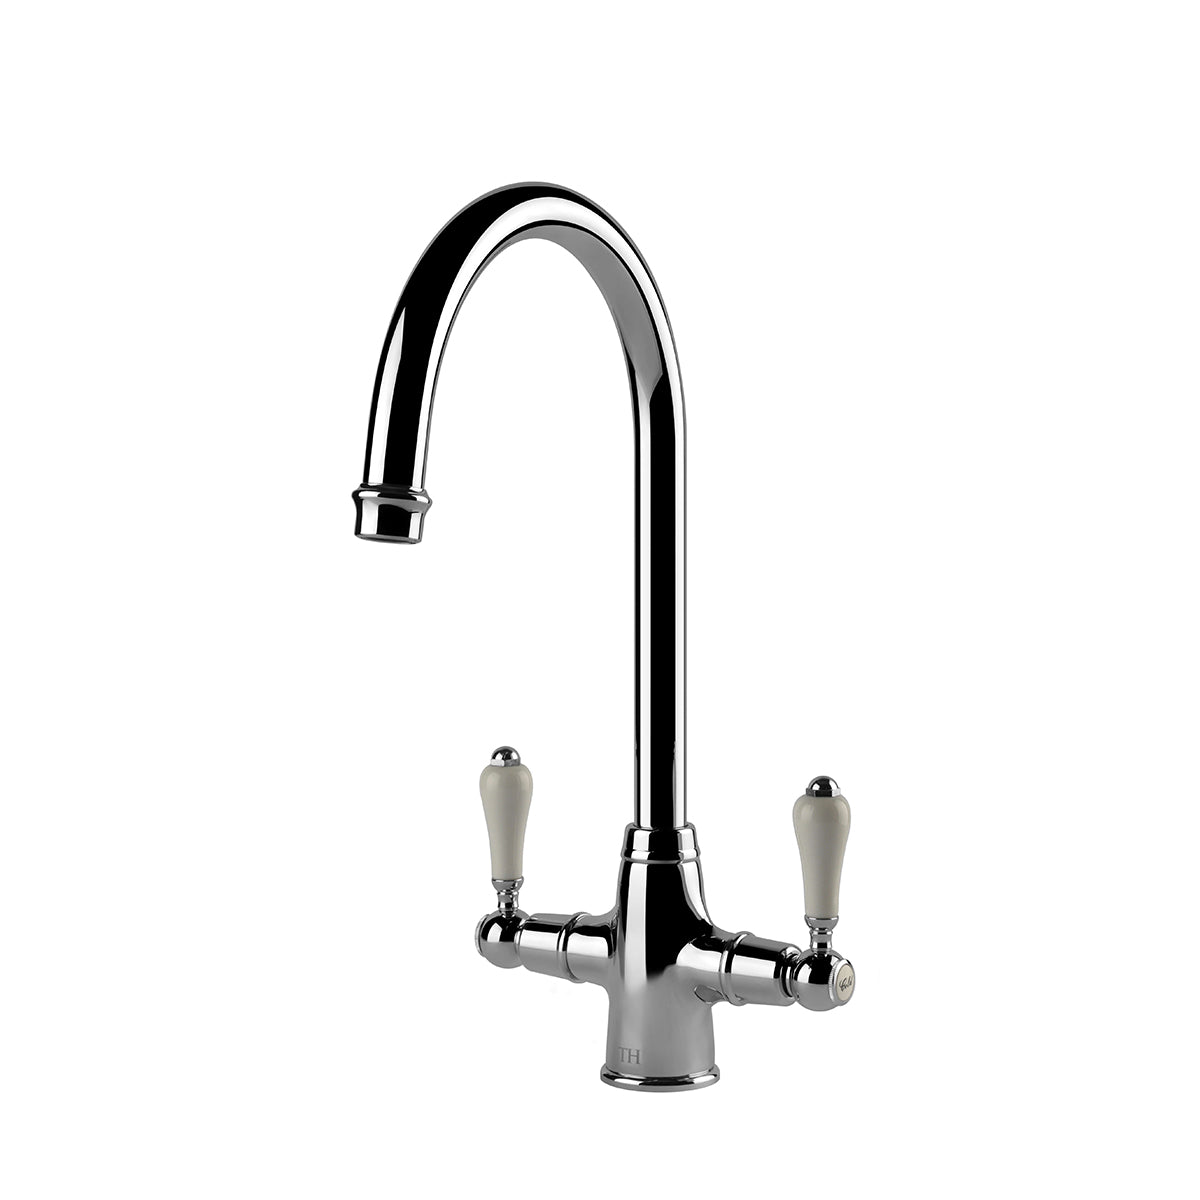 TURNER HASTINGS LUDLOW DOUBLE SINK MIXER TAP 355MM CHROME (CERAMIC HANDLE)